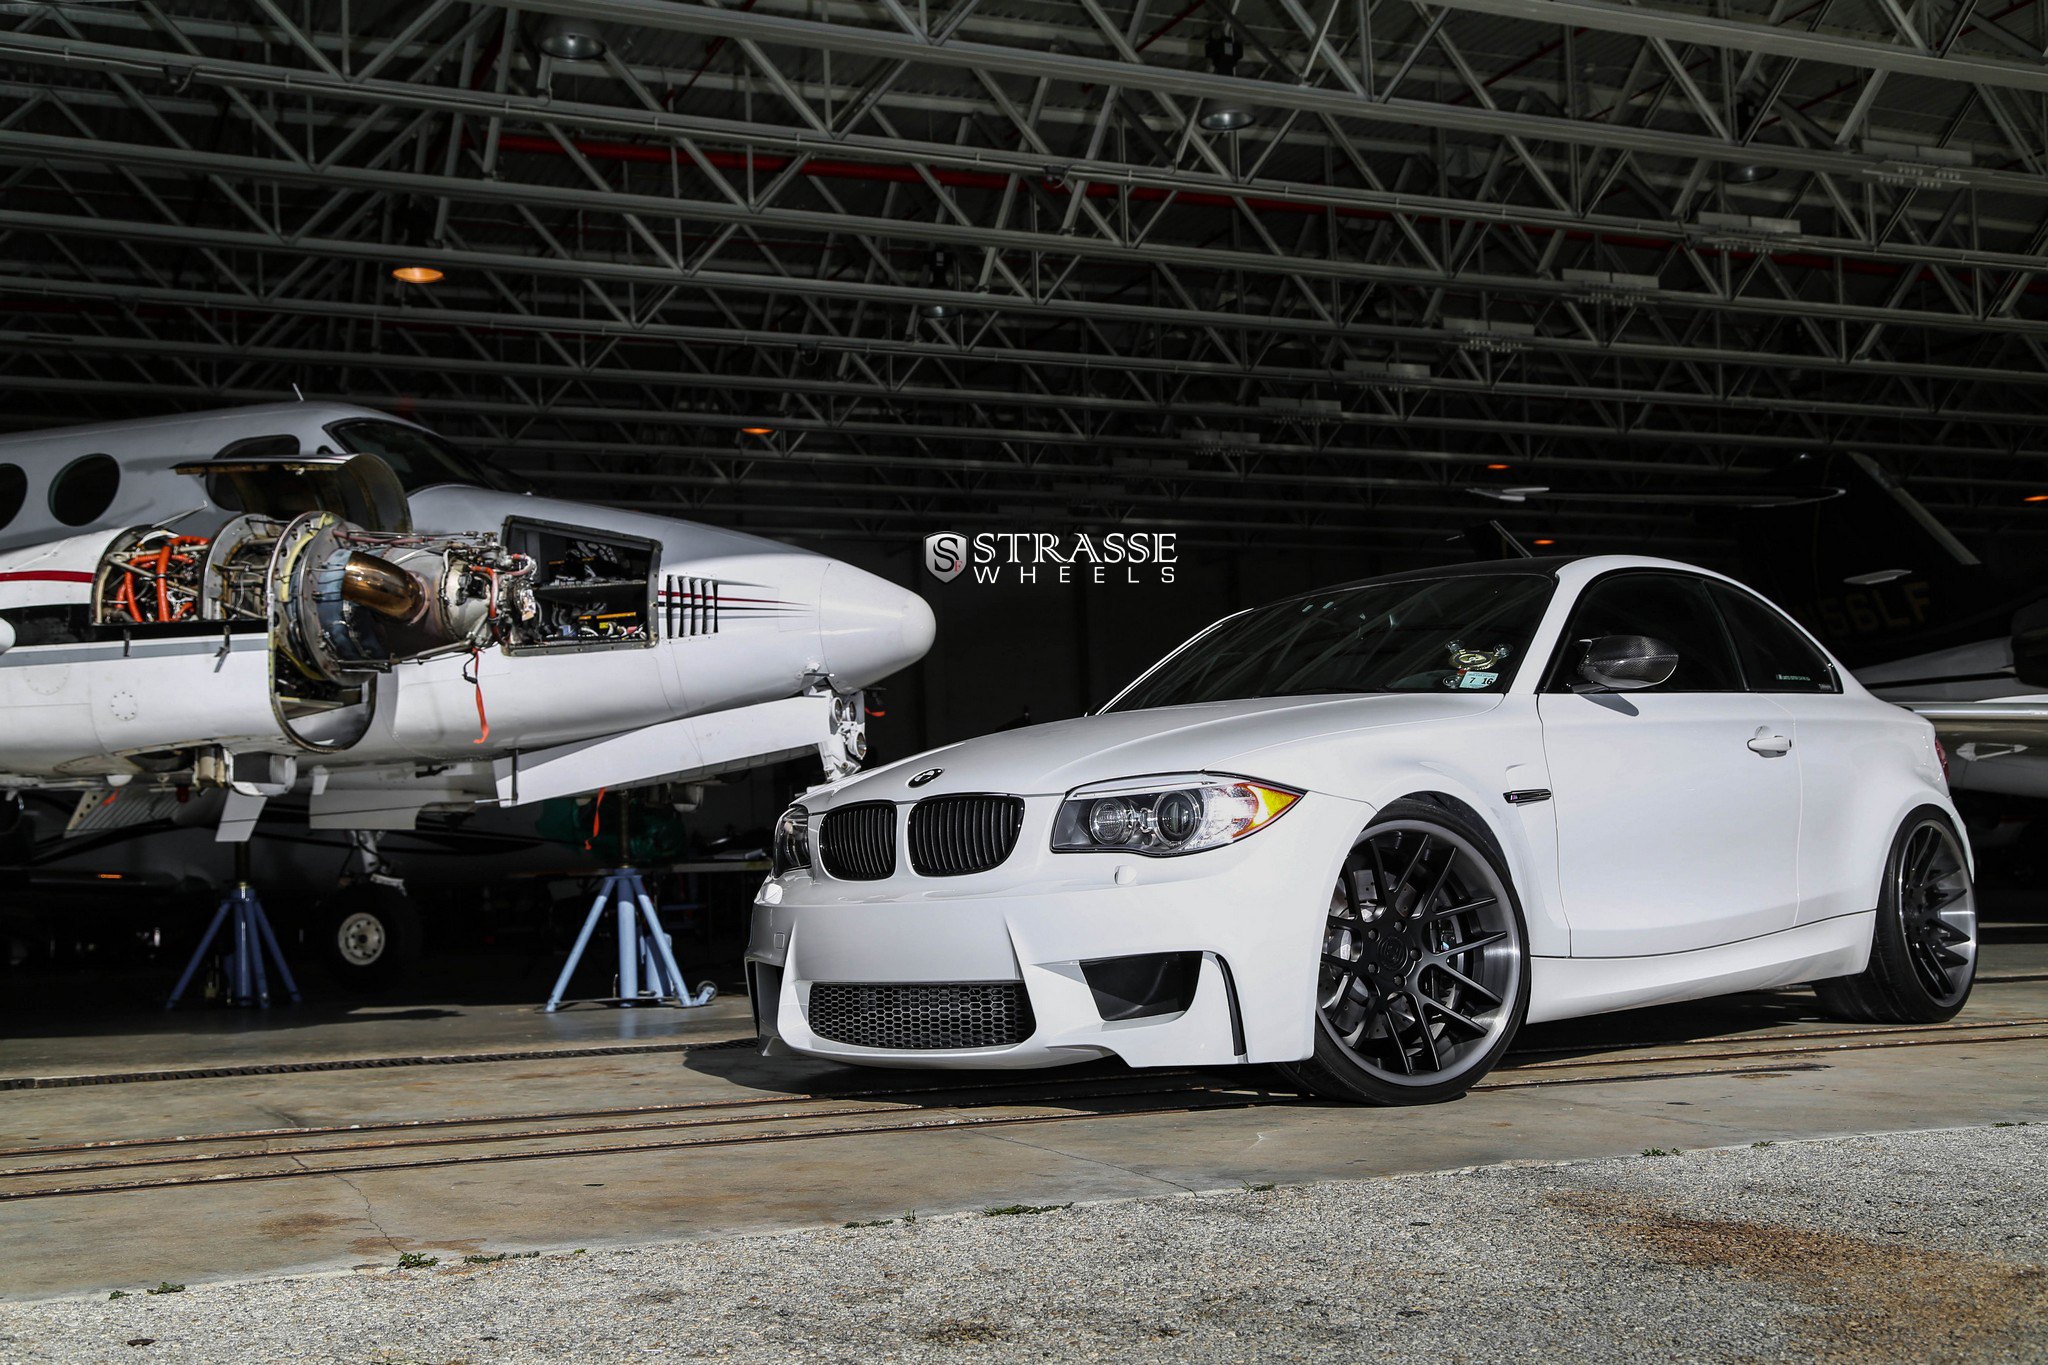 Aftermarket Front Bumper on White BMW 1-Series - Photo by Strasse Forged